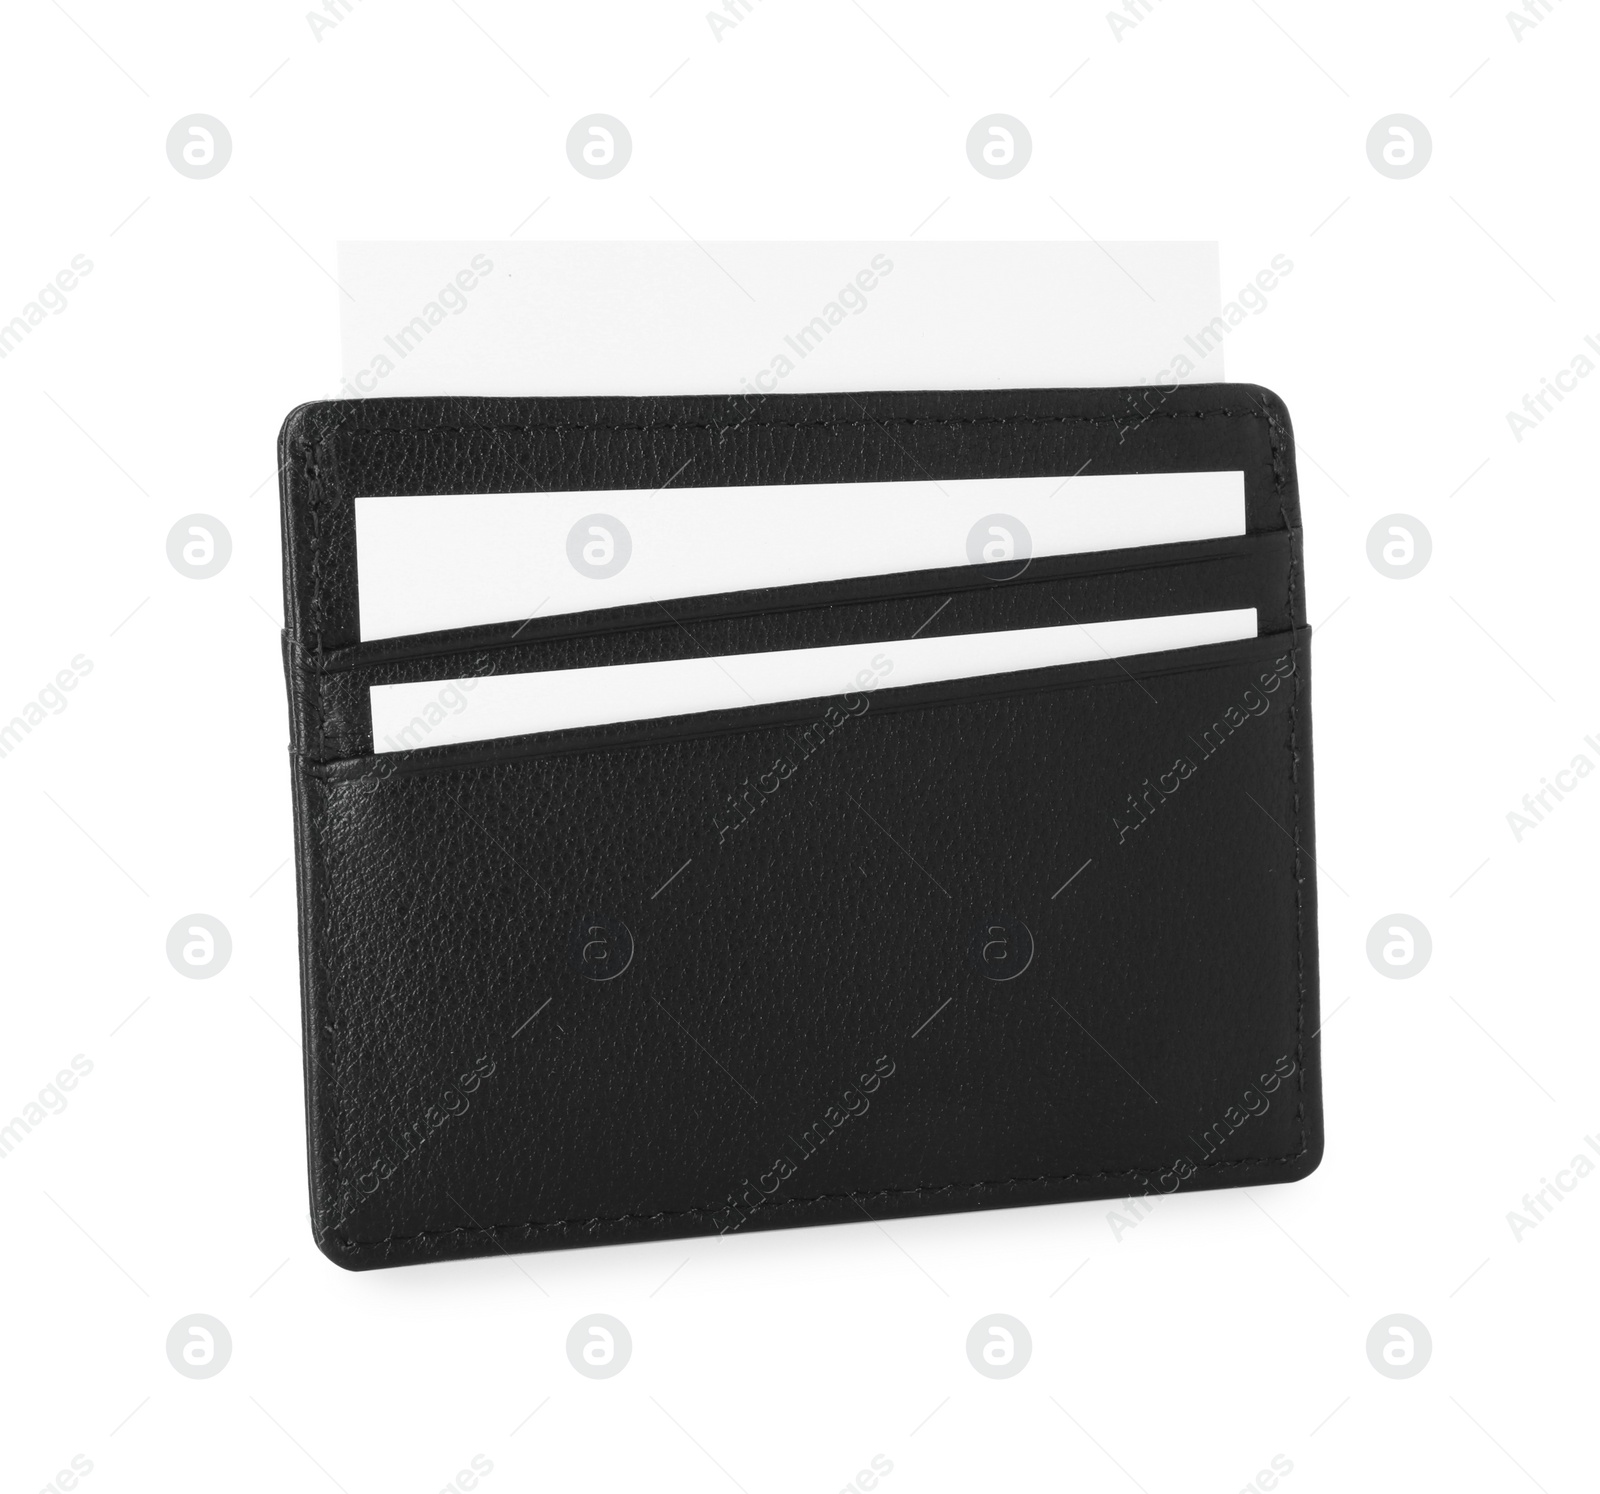 Photo of Black business card holder with cards isolated on white